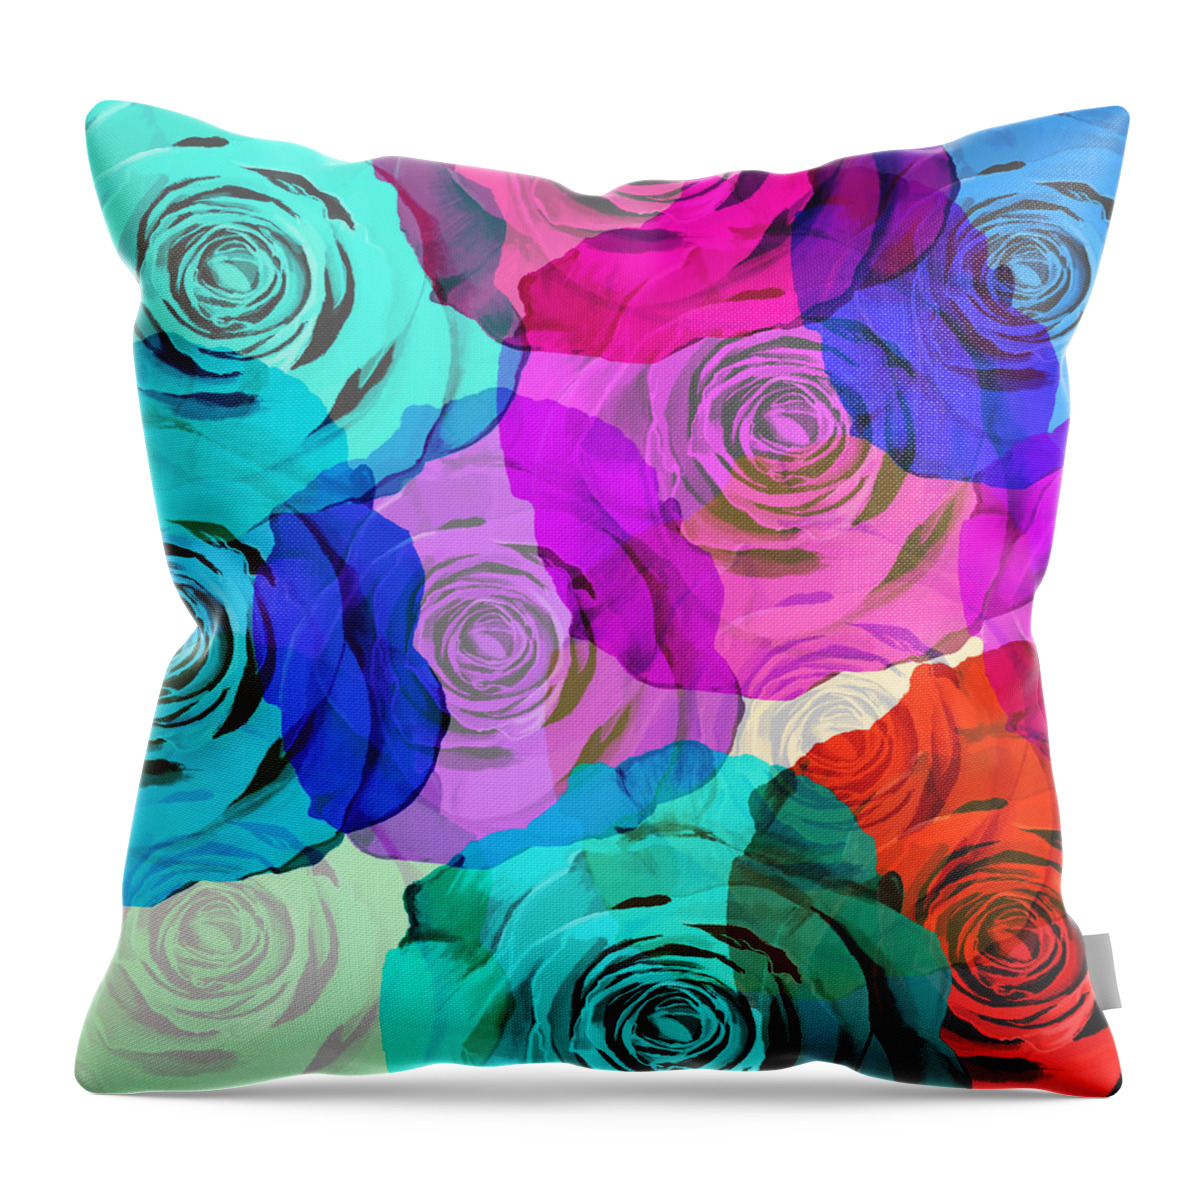 Affection Throw Pillow featuring the photograph Colorful Roses Design #1 by Setsiri Silapasuwanchai